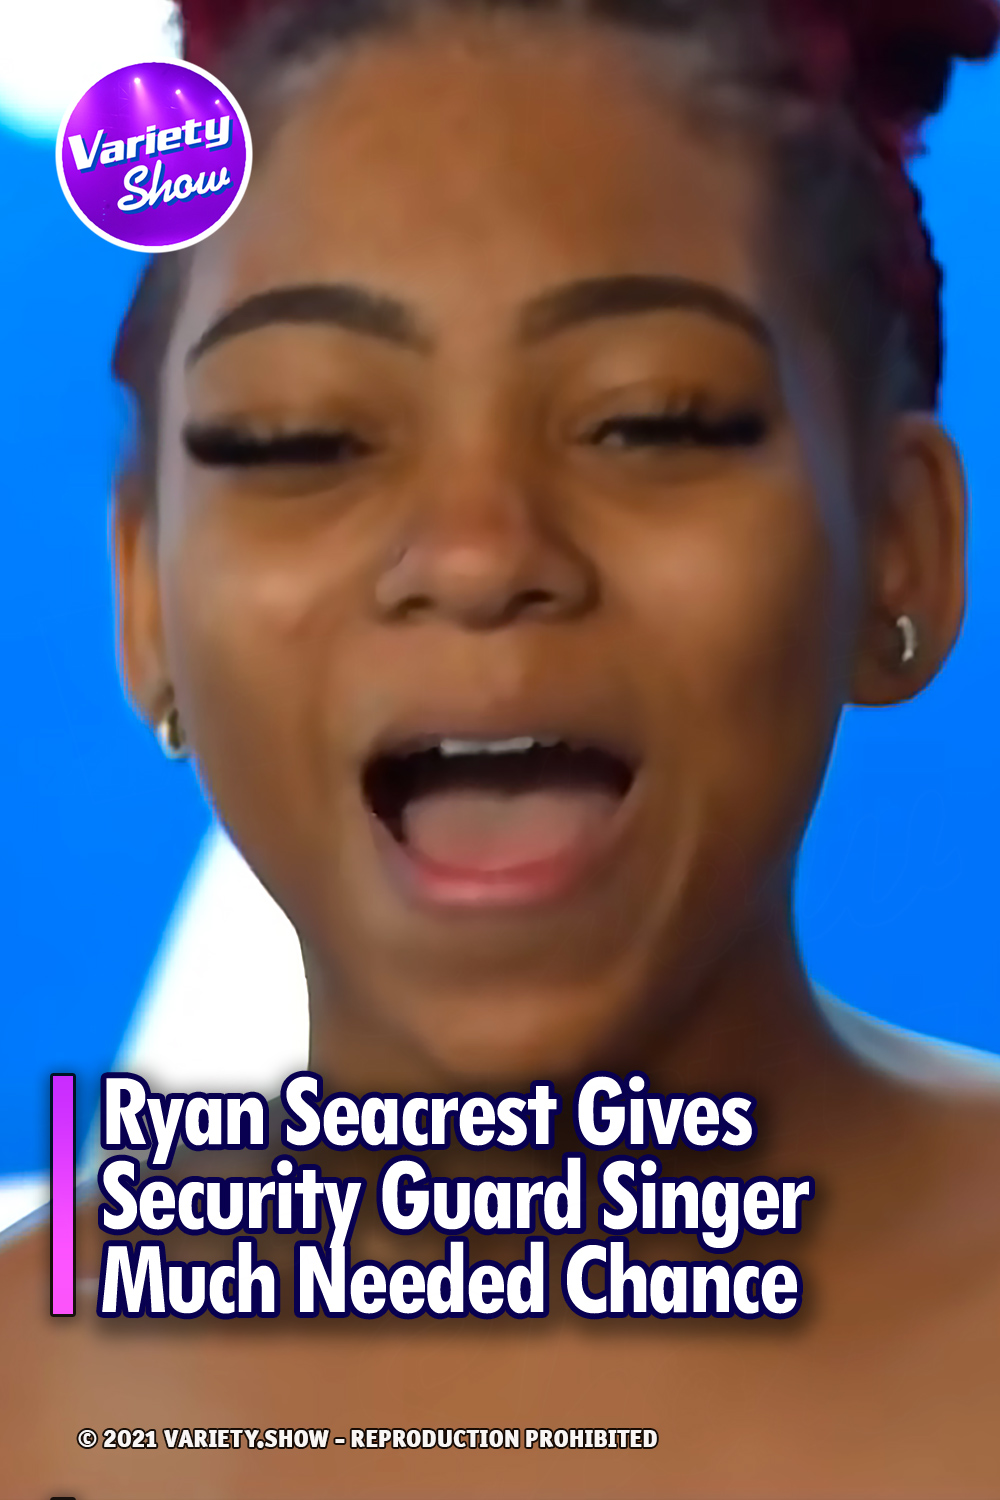 Ryan Seacrest Gives Security Guard Singer Much Needed Chance